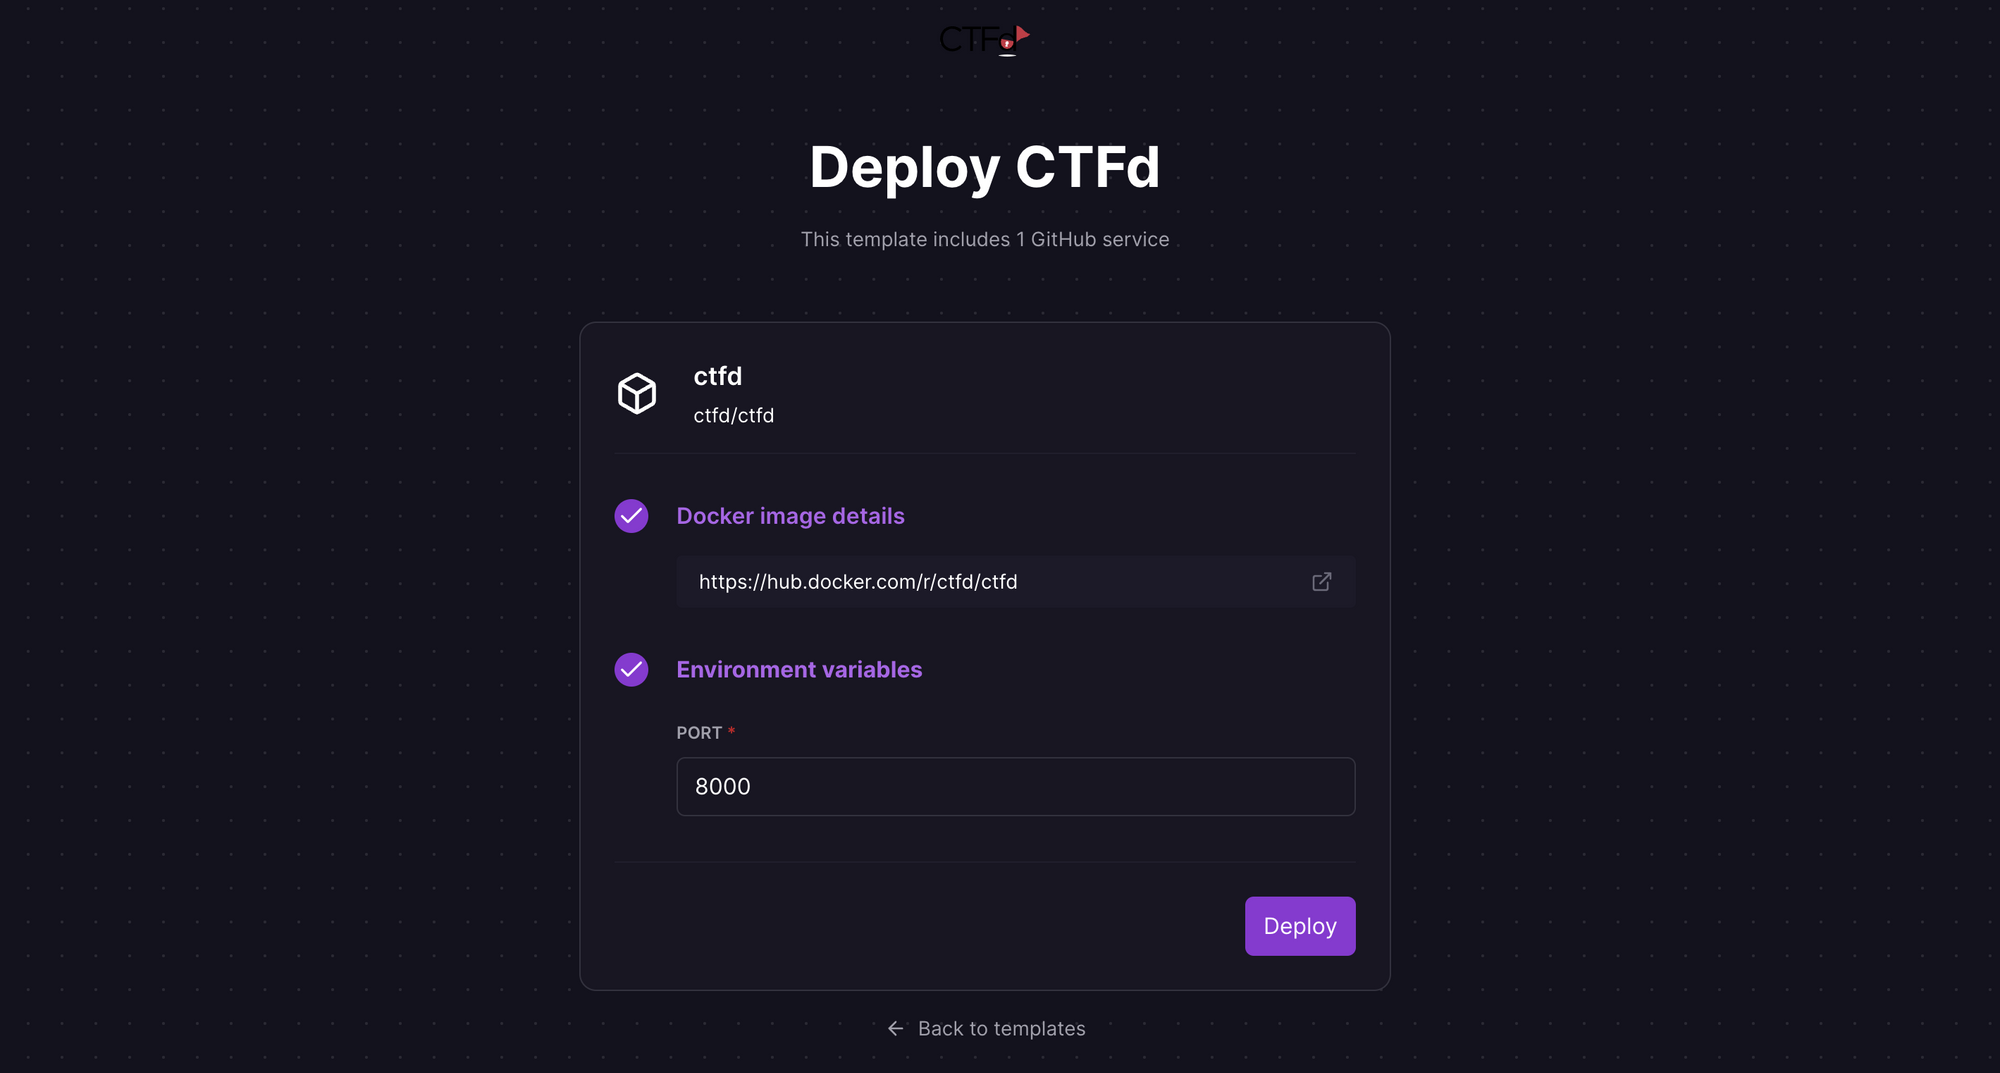 Deploy CTFd using the one-click starter template